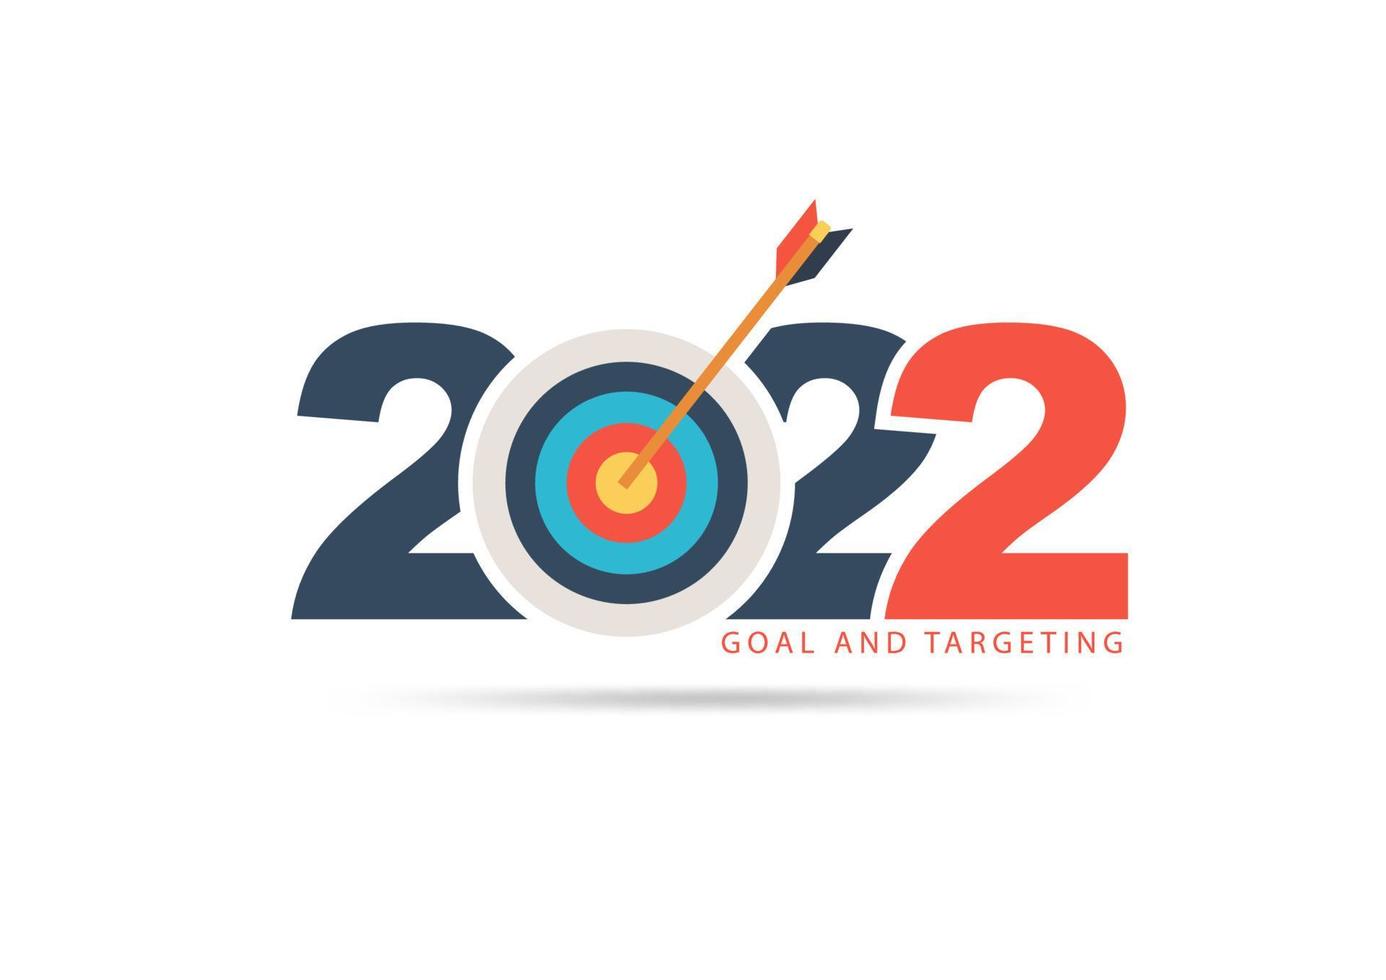 Logo 2022 new year with creative target market ideas concept design, Vector illustration modern layout template